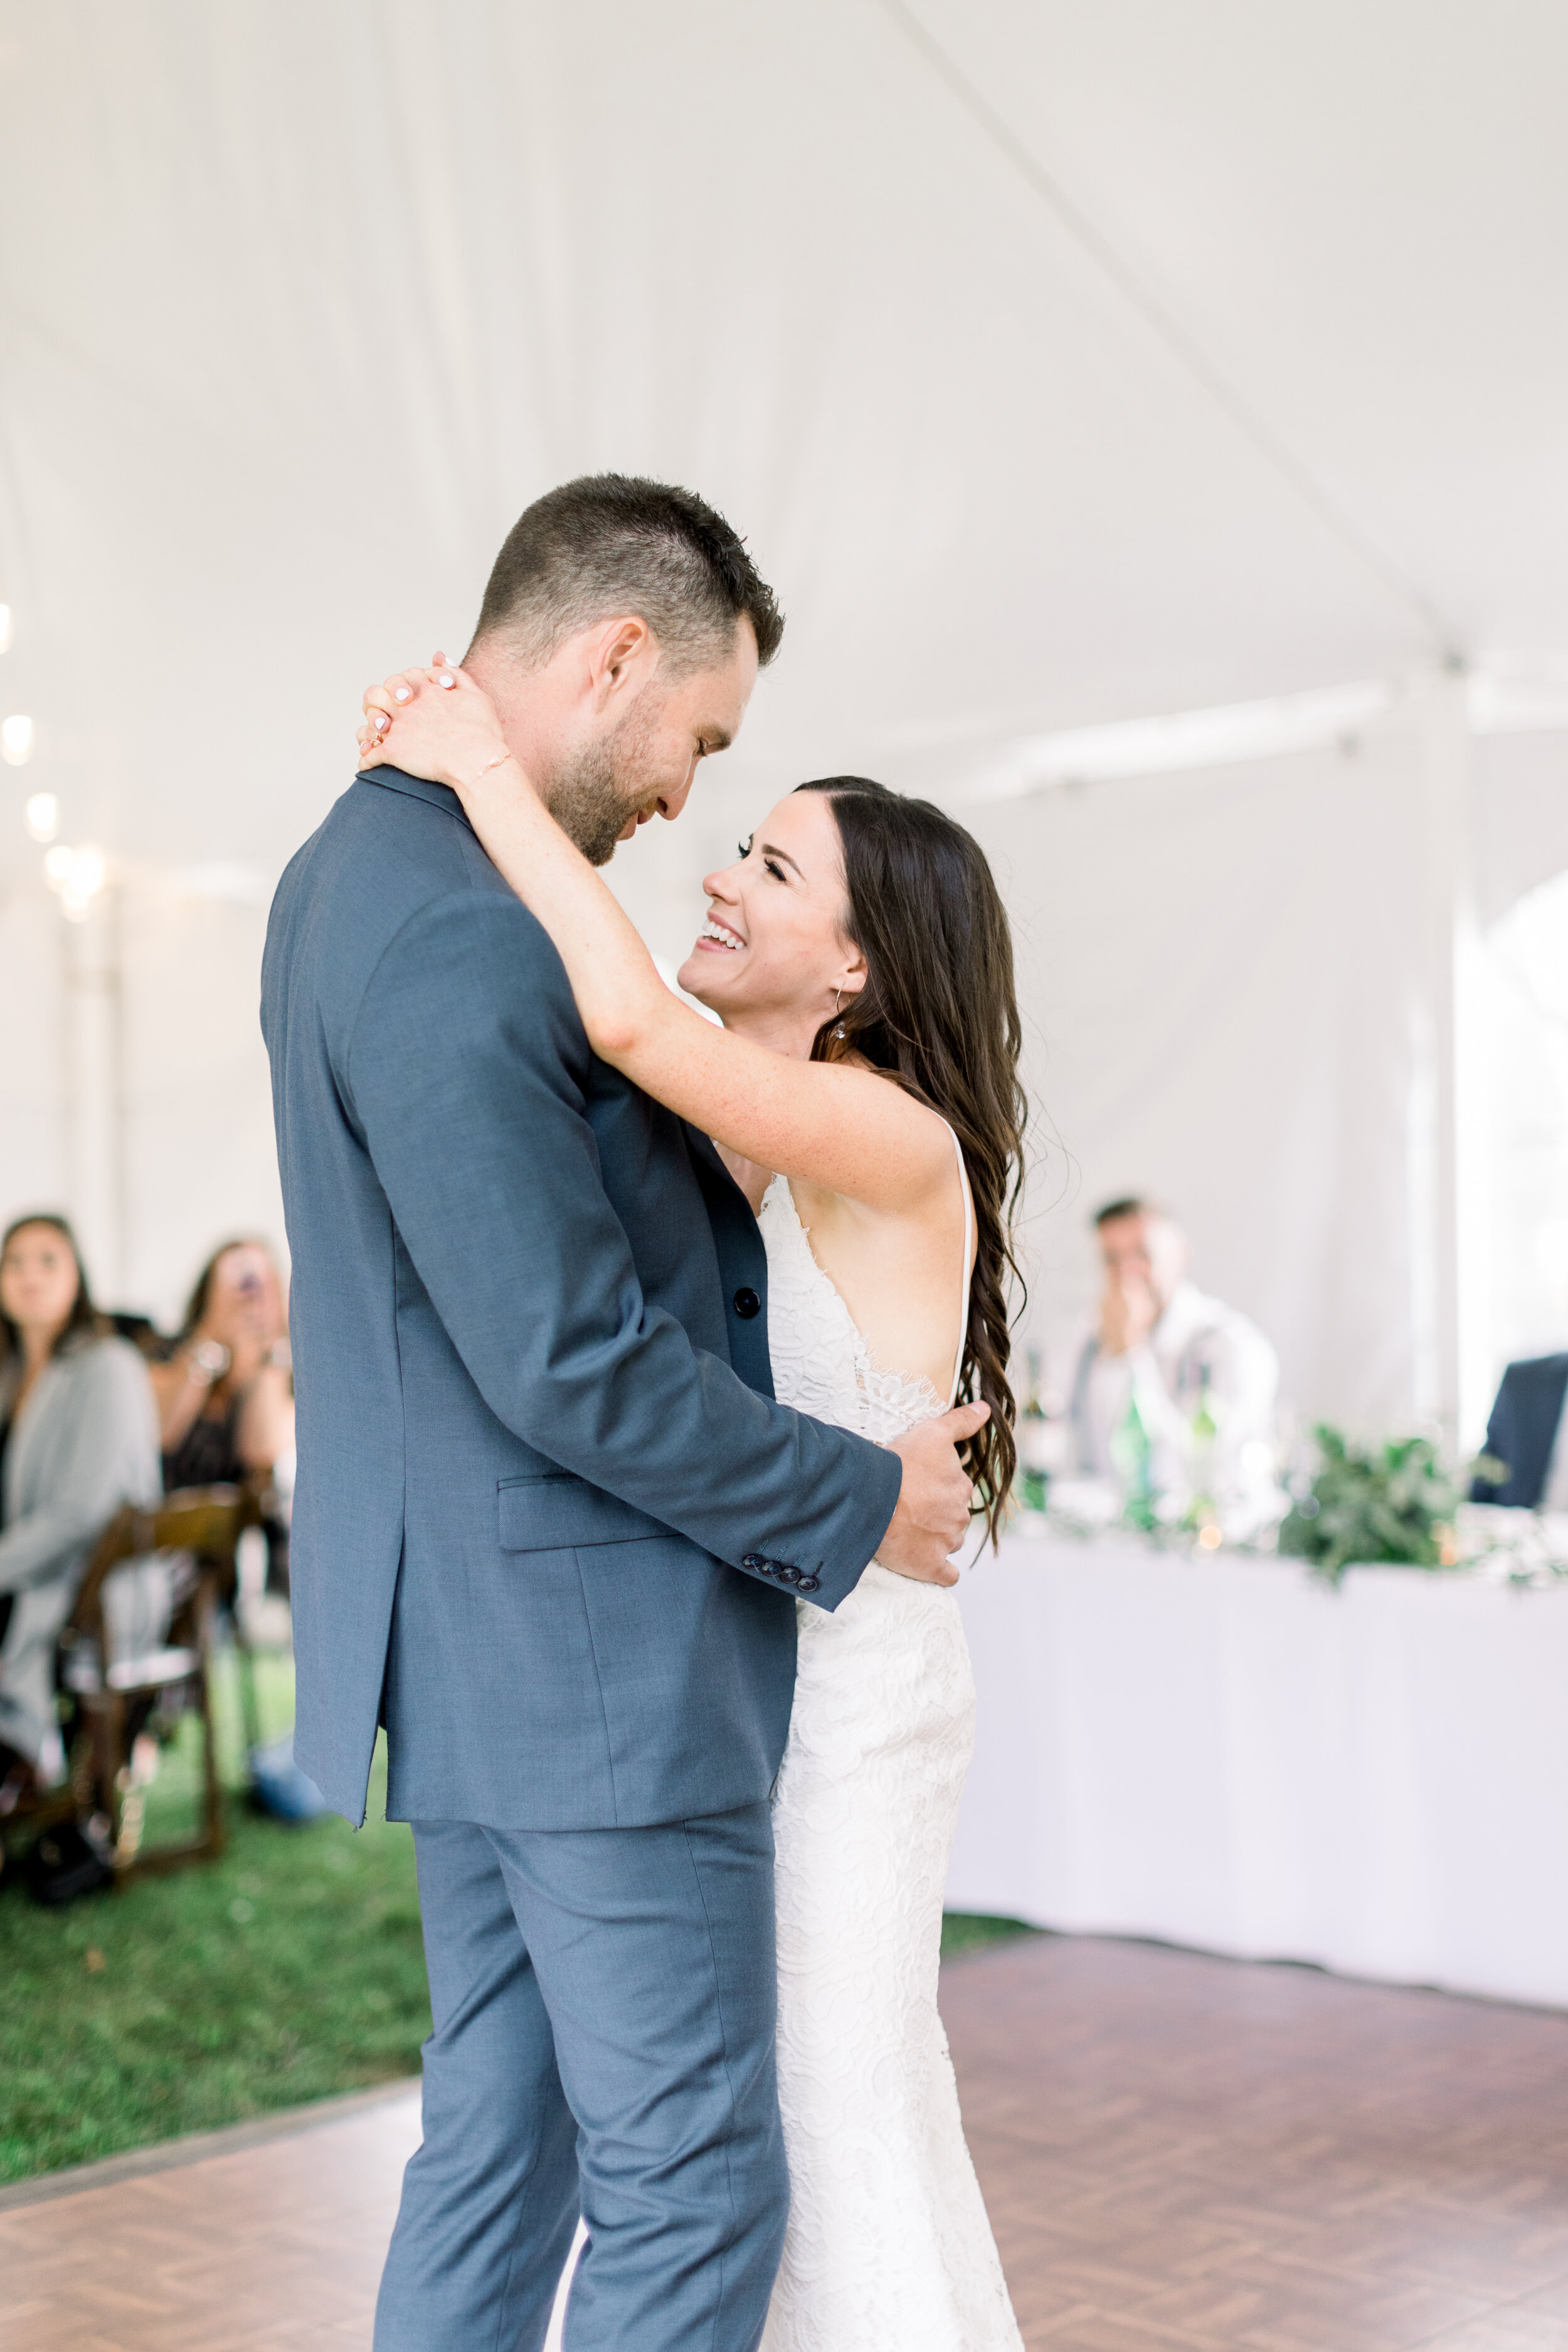  The first dance as husband and wife in this gorgeous backyard wedding in Ottawa, Ontario with Chelsea Mason Photography. Happy smiles bride and groom husband and wife white wedding dress navy blue wedding suit attire Fenelon Falls ontario wedding ph